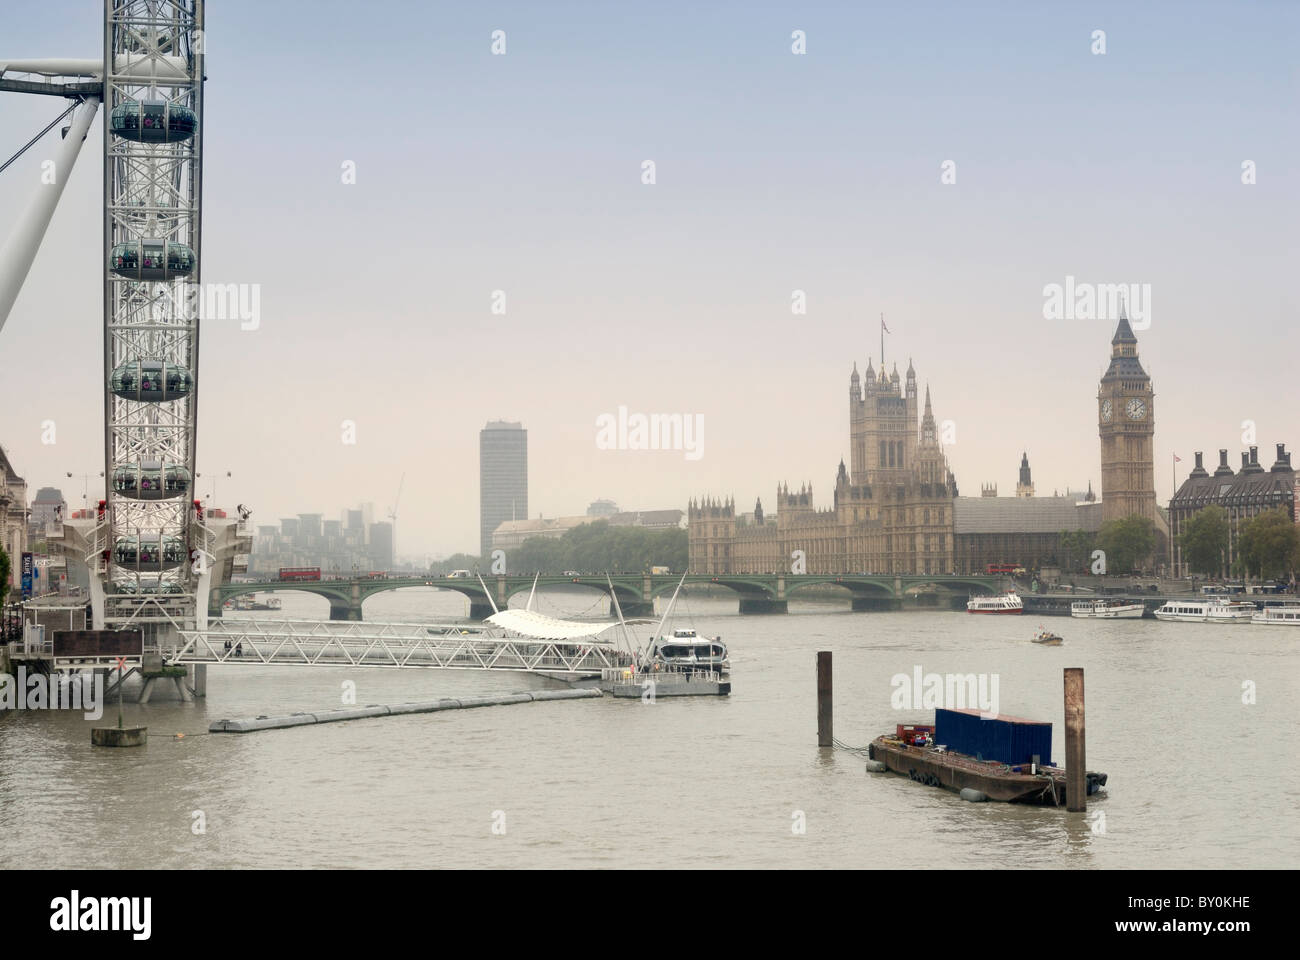 View along the River Thames, London eye and Houses of Parliament in the distance Stock Photo